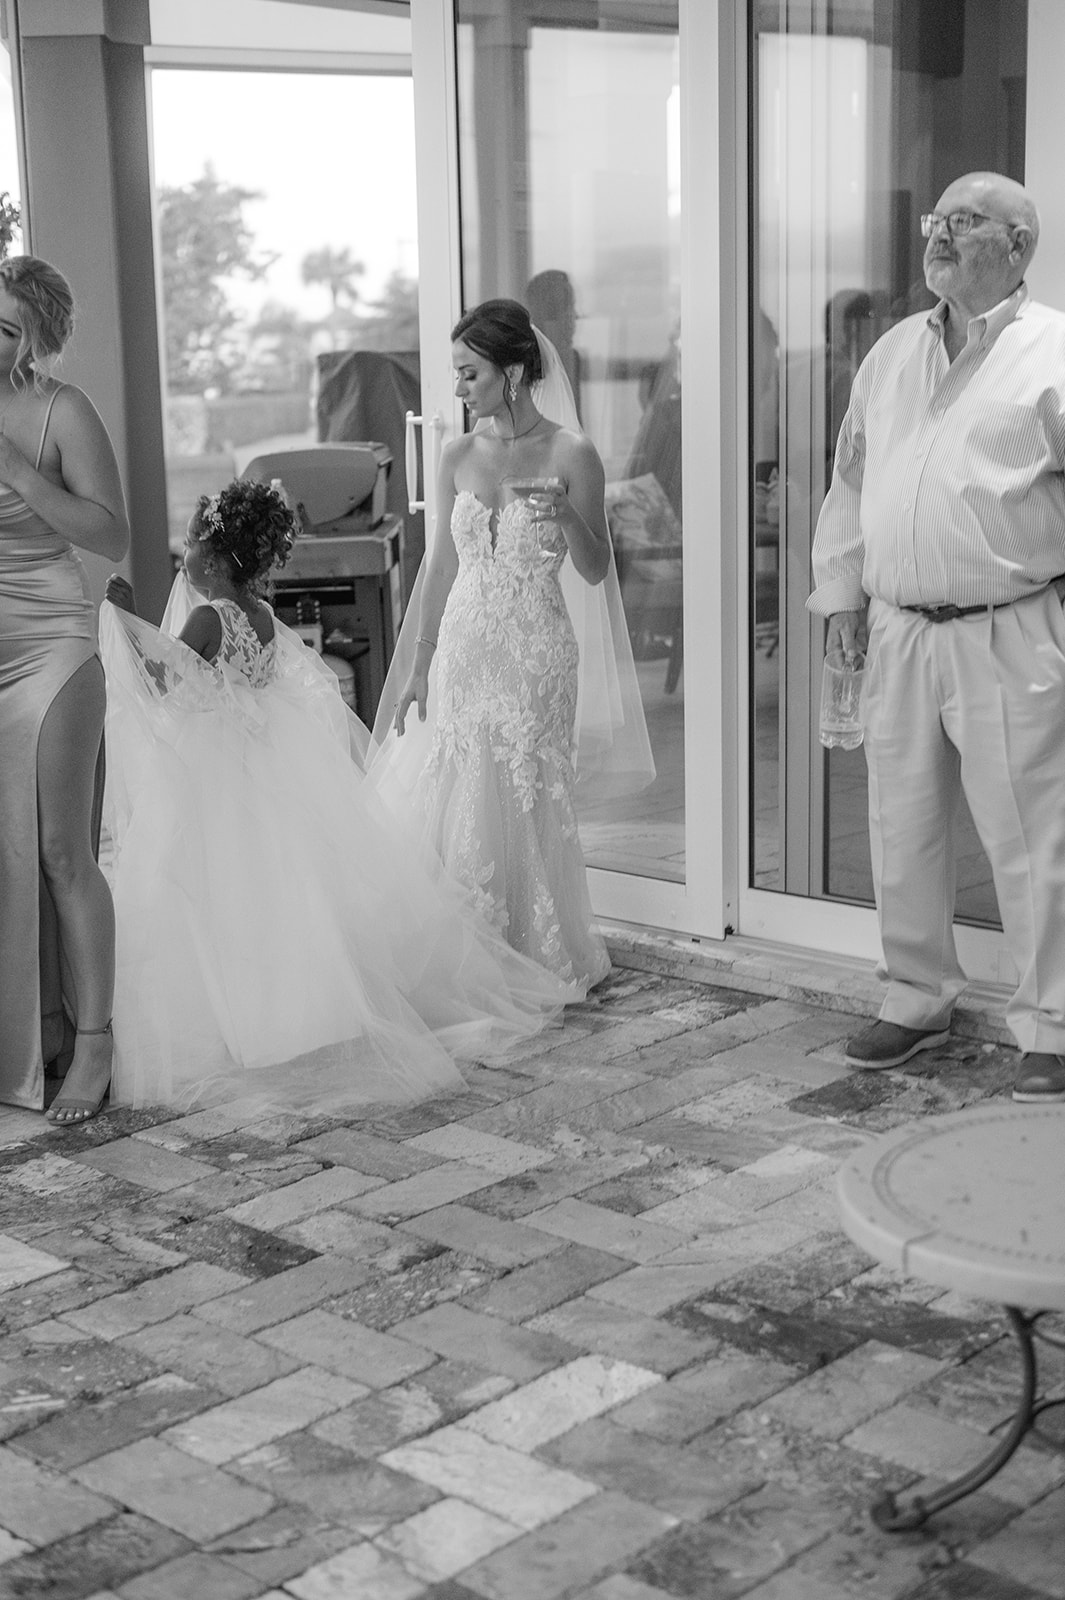 Gulfshore Life Magazine - Featuring the Expertise of a Marco Island Wedding Photographer
